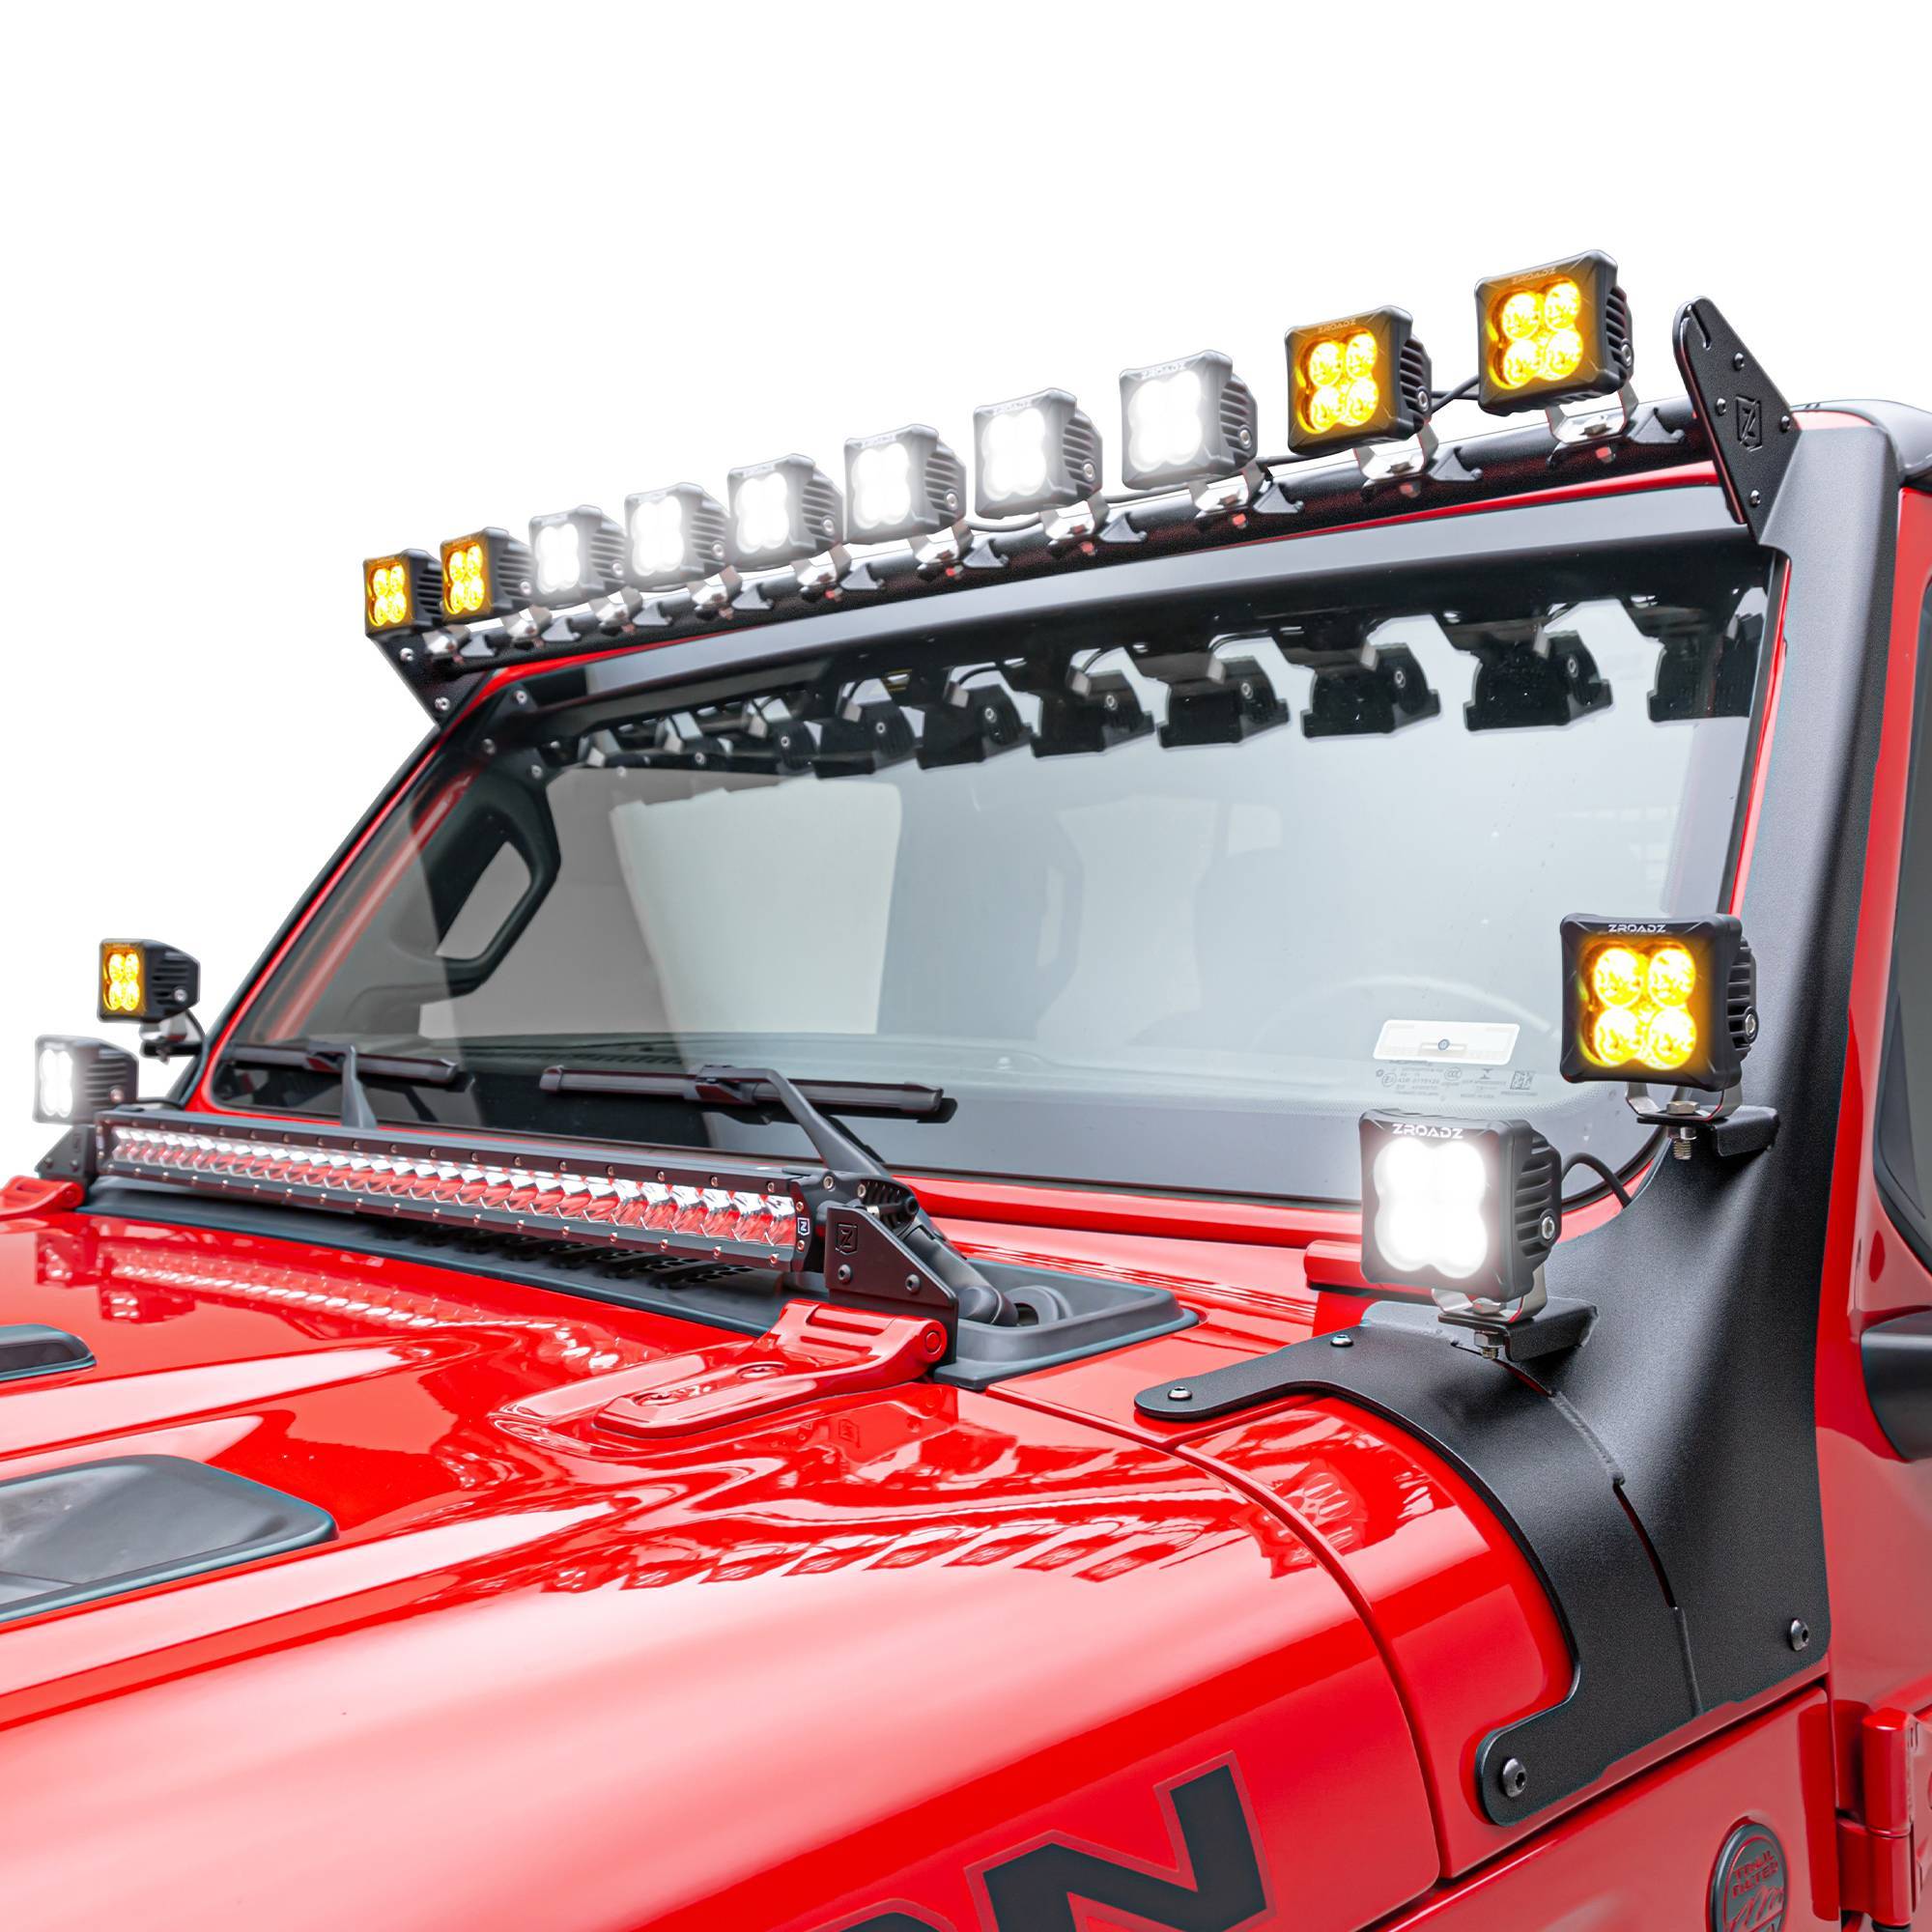 ZROADZ OFF ROAD PRODUCTS - 2019-2022 Jeep Gladiator, JL Multi-LED Roof Cross Bar and 4-Pod A-Pllar Complete KIT, Includes (14) 3-Inch ZROADZ Light Pods - Part # Z934931-KIT4AW